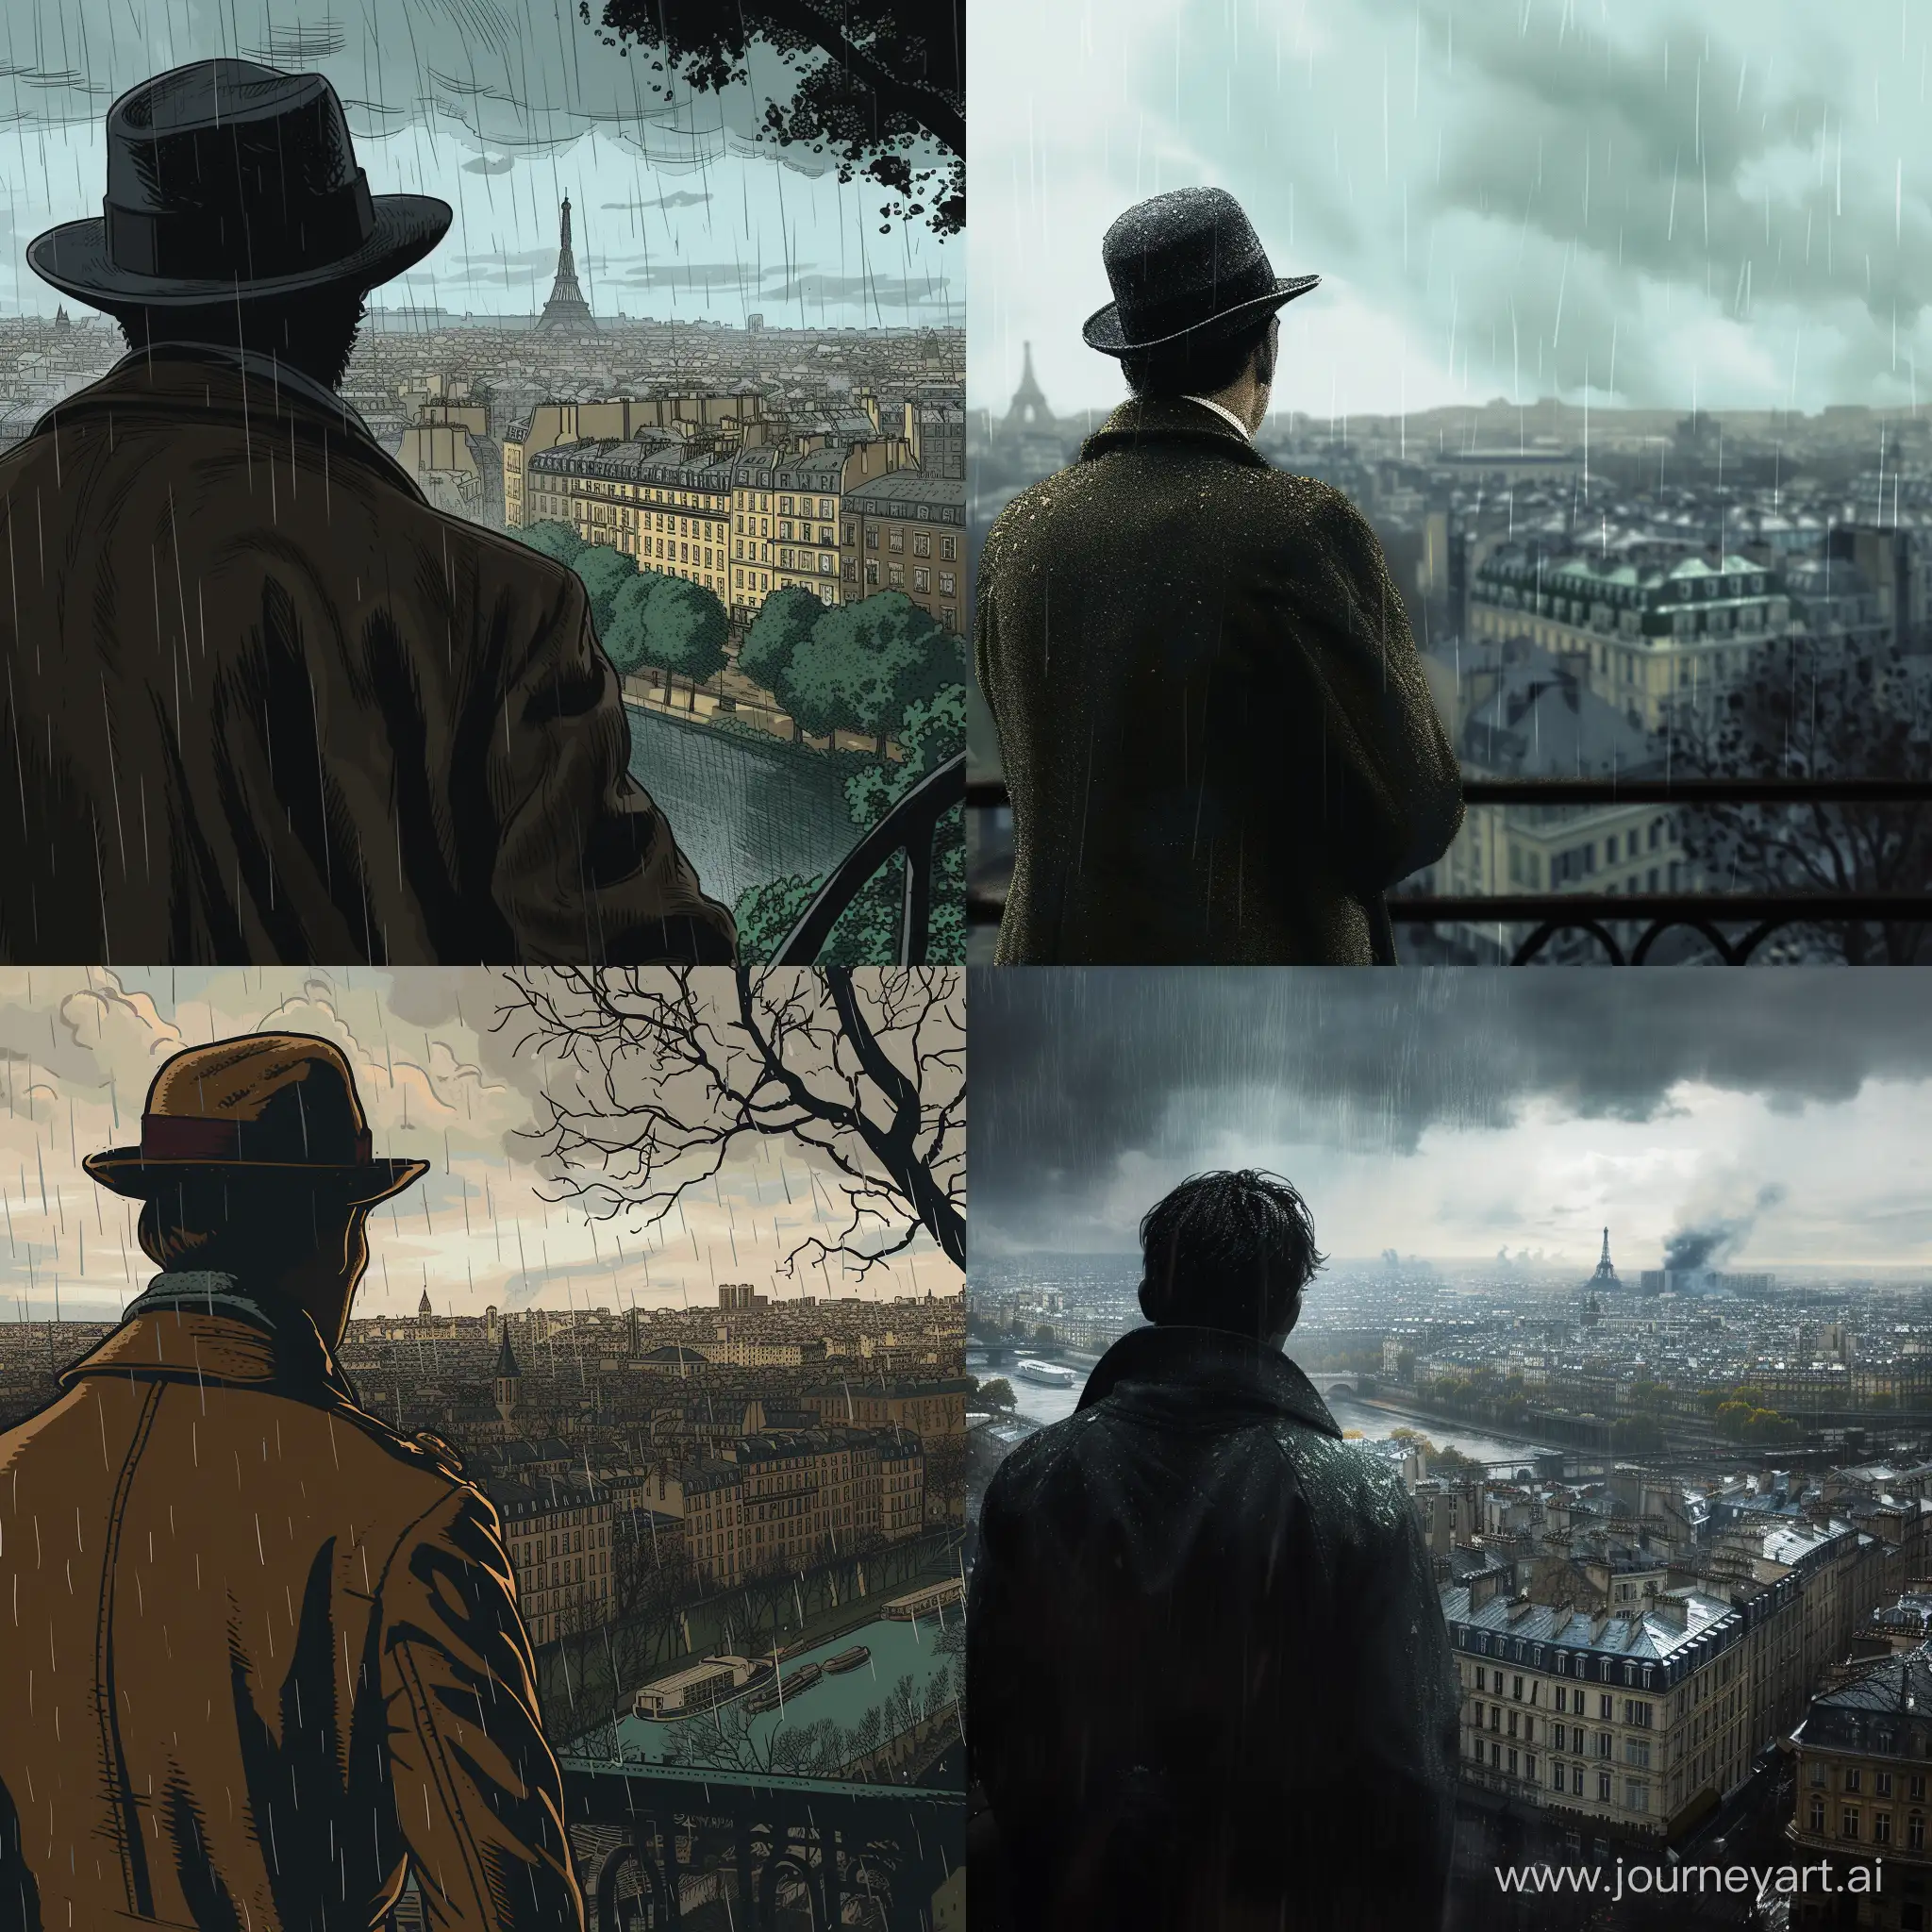 A French citizen looks at the landscape against the background of the city during the 30s. It's raining in the background. In color 
